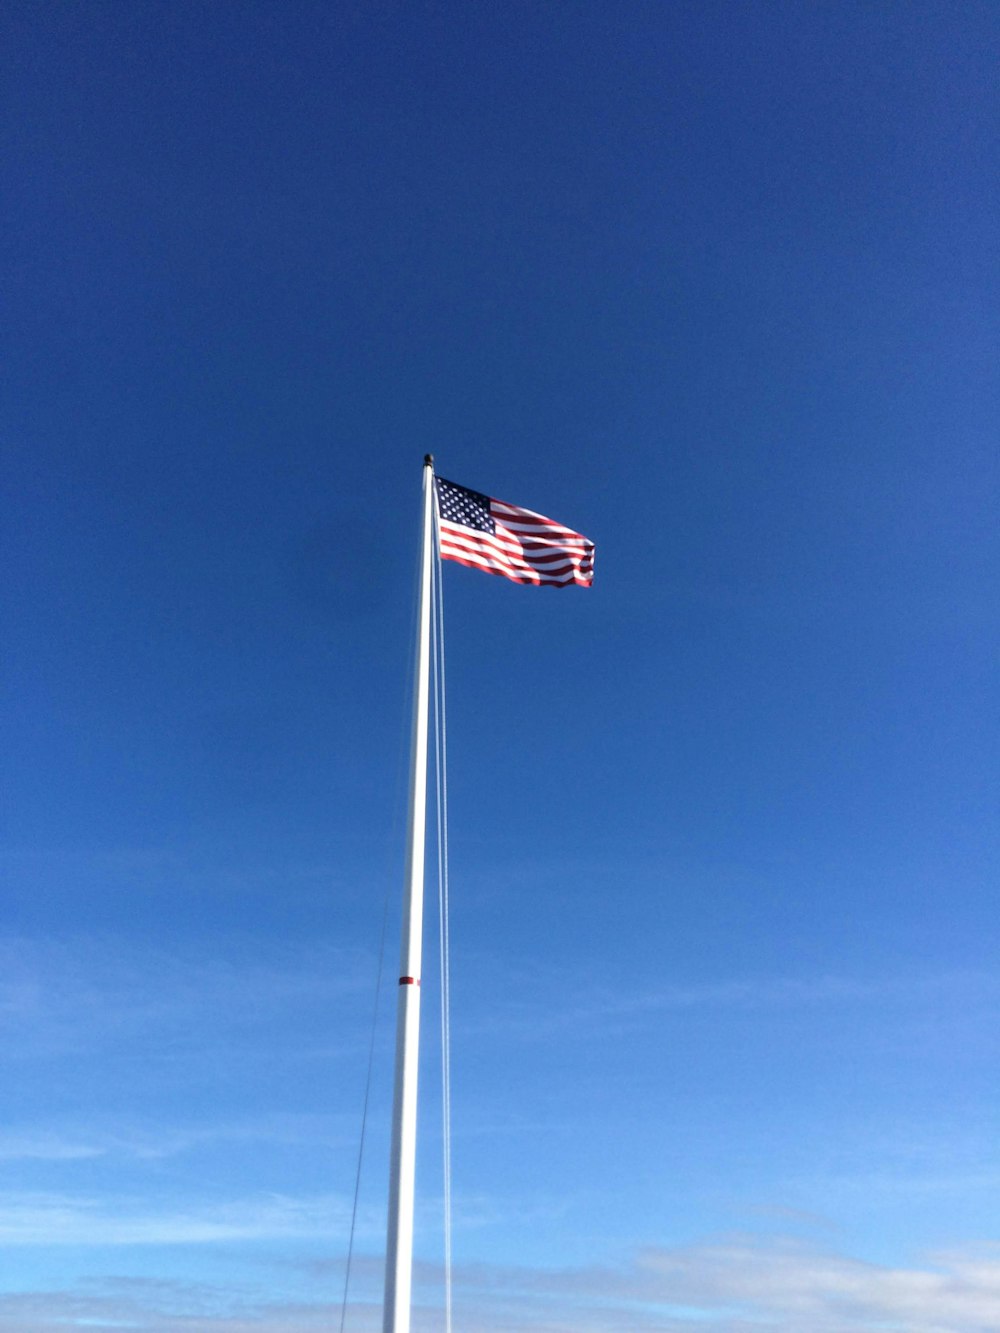 a flag on a pole with a boat in the background